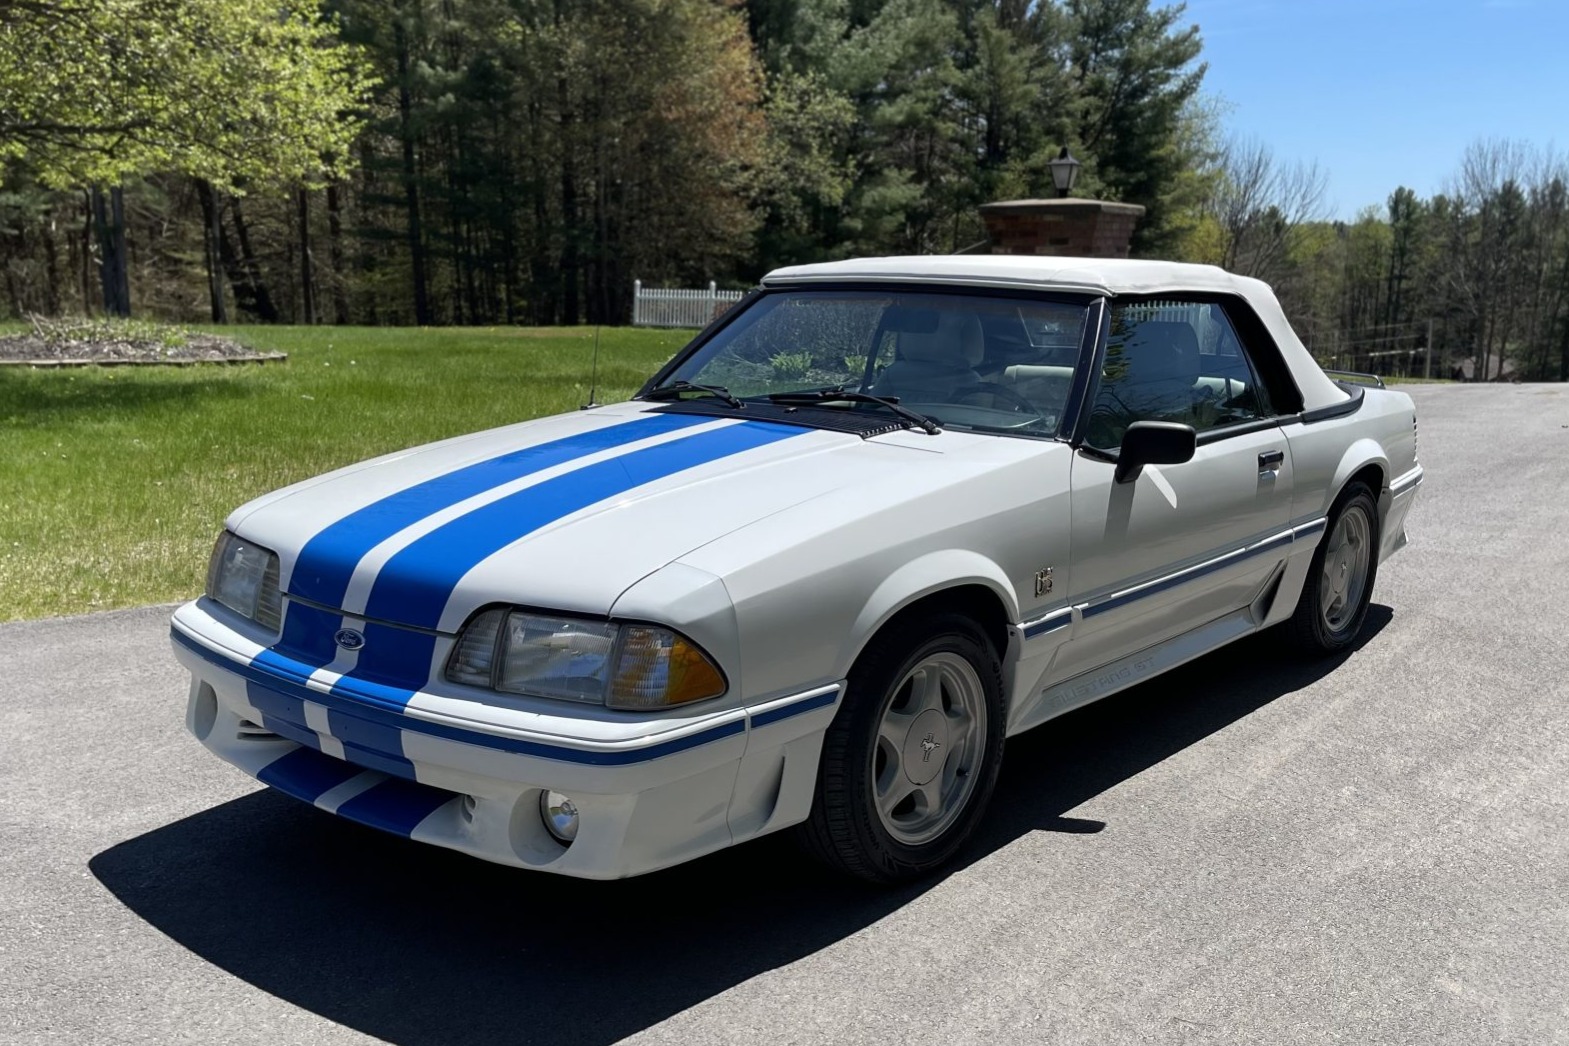 Used 1988 Ford Mustang GT 5.0 Convertible 5-Speed Review